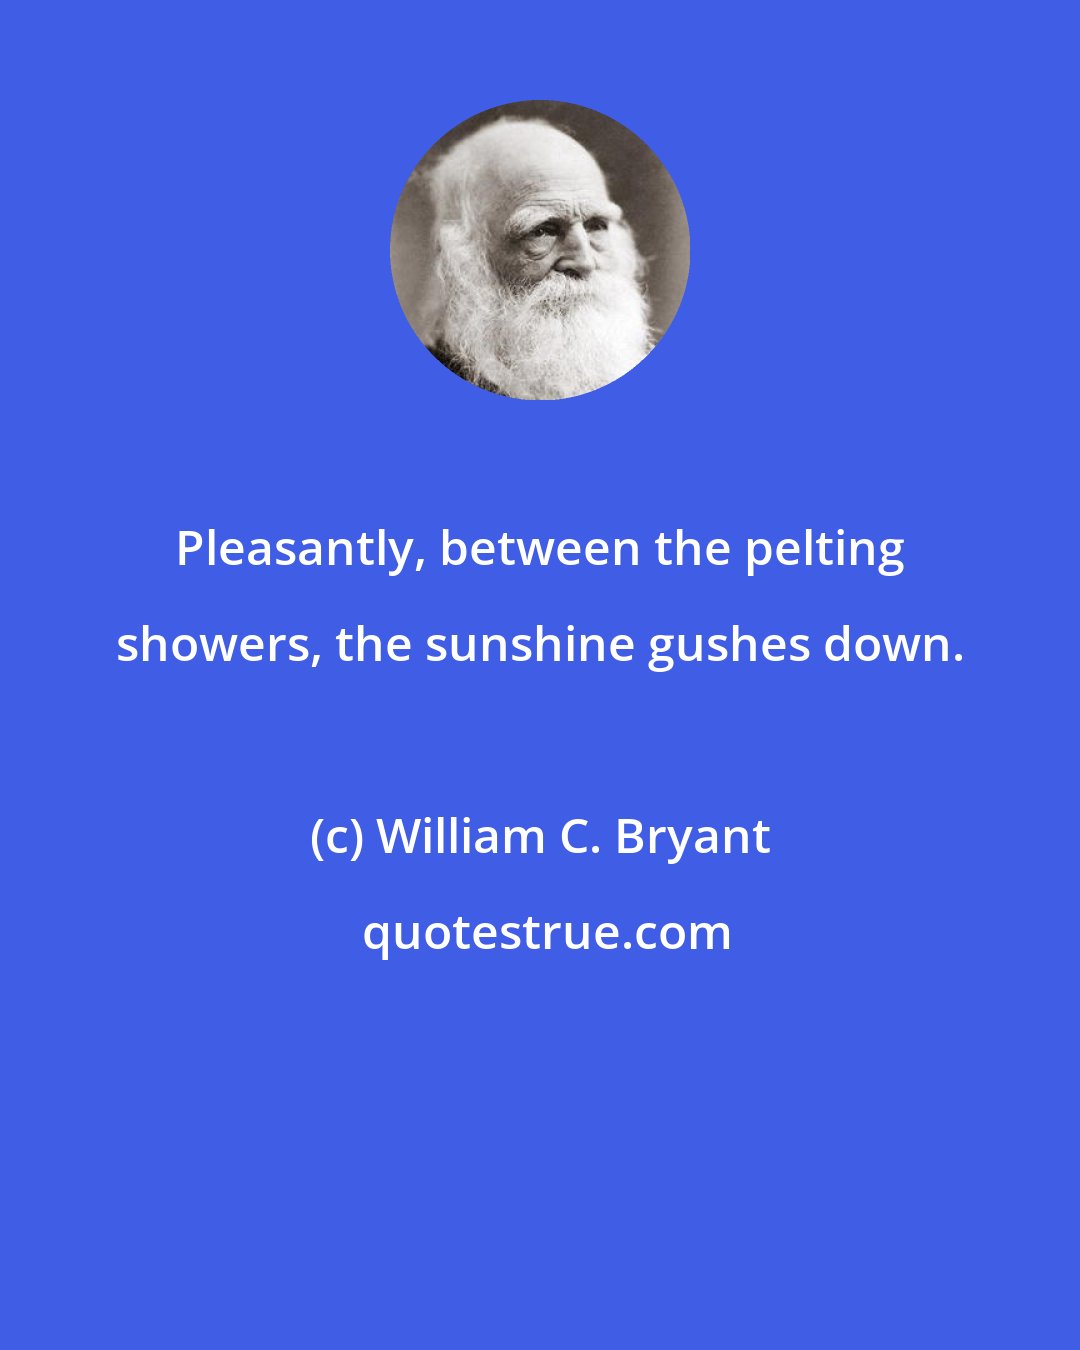 William C. Bryant: Pleasantly, between the pelting showers, the sunshine gushes down.